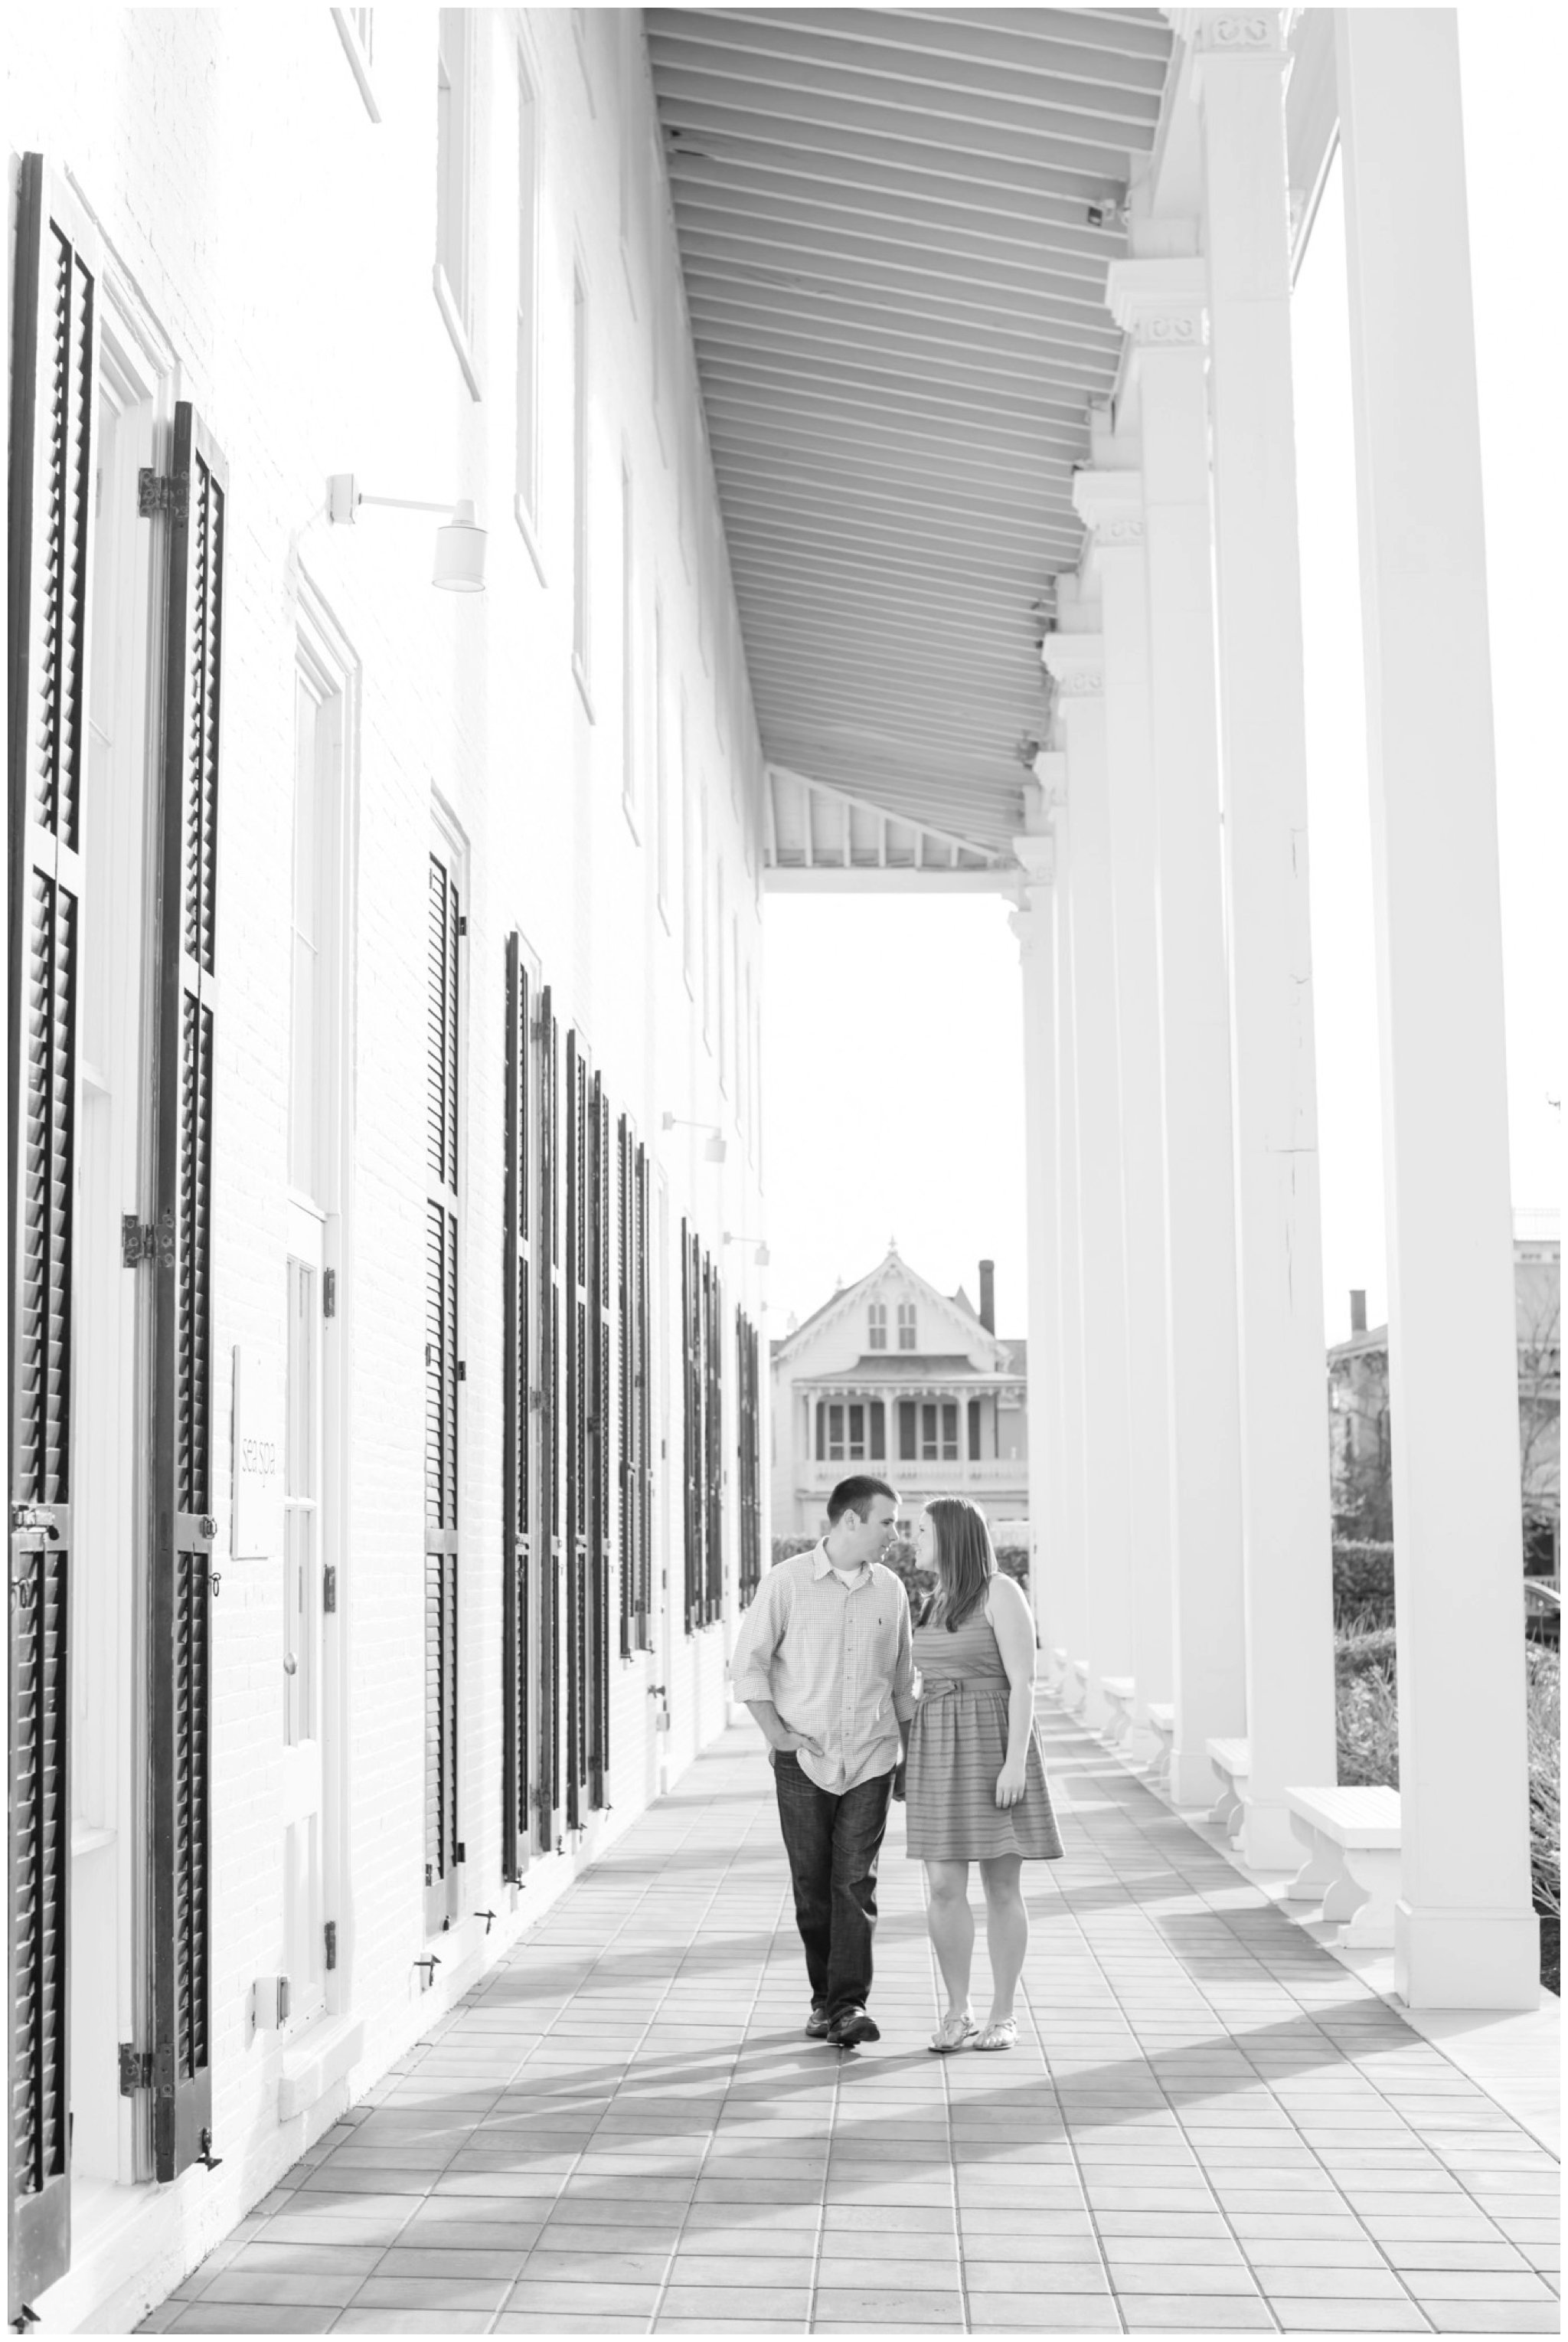 Cape May Engagement Session_Colleen and Matt_Laura Lee Photography_0061